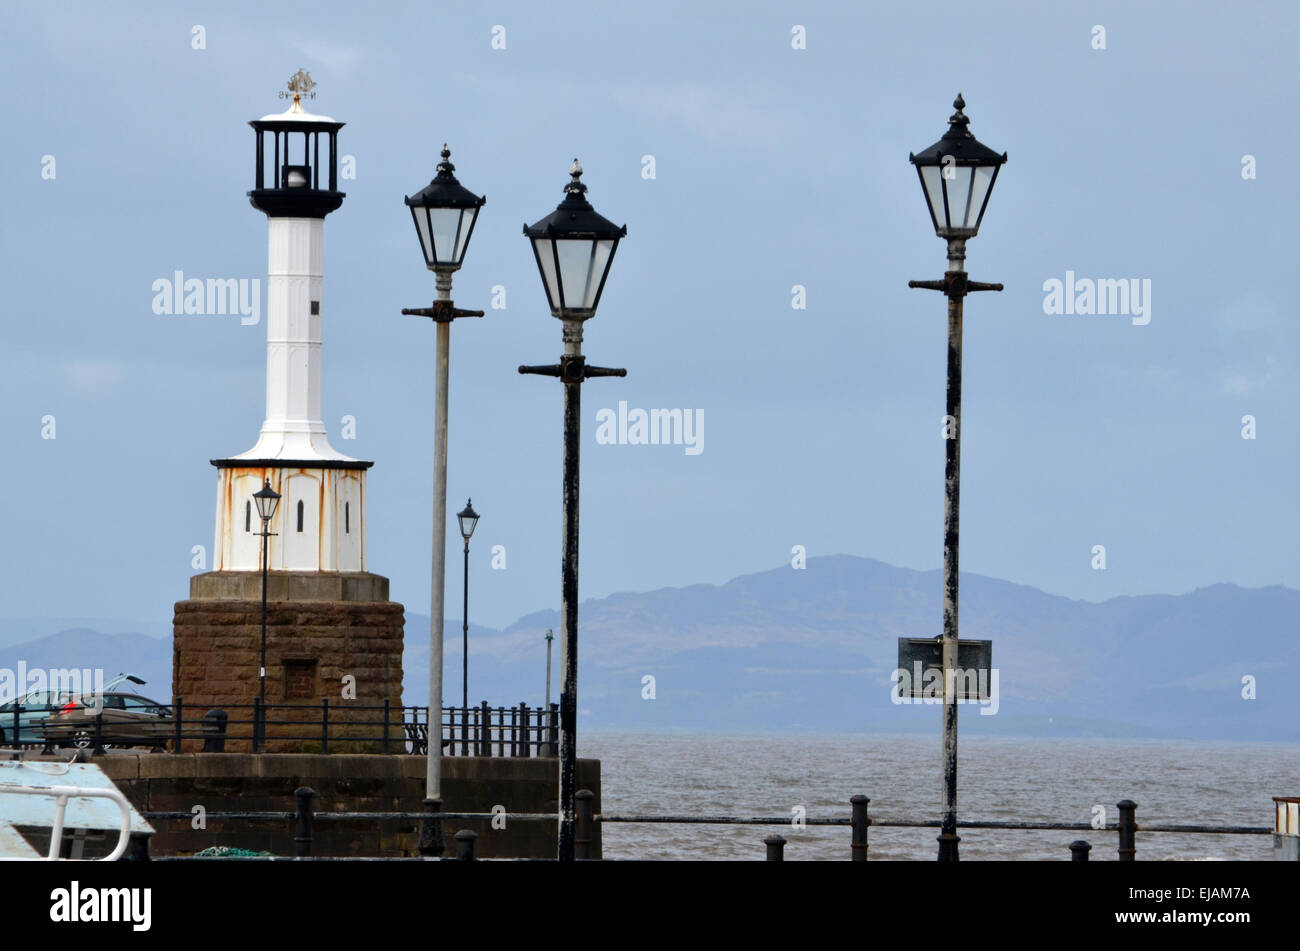 Maryport Lighthouse is a small Lighthouse located in Maryport, Cumbria, England. Stock Photo